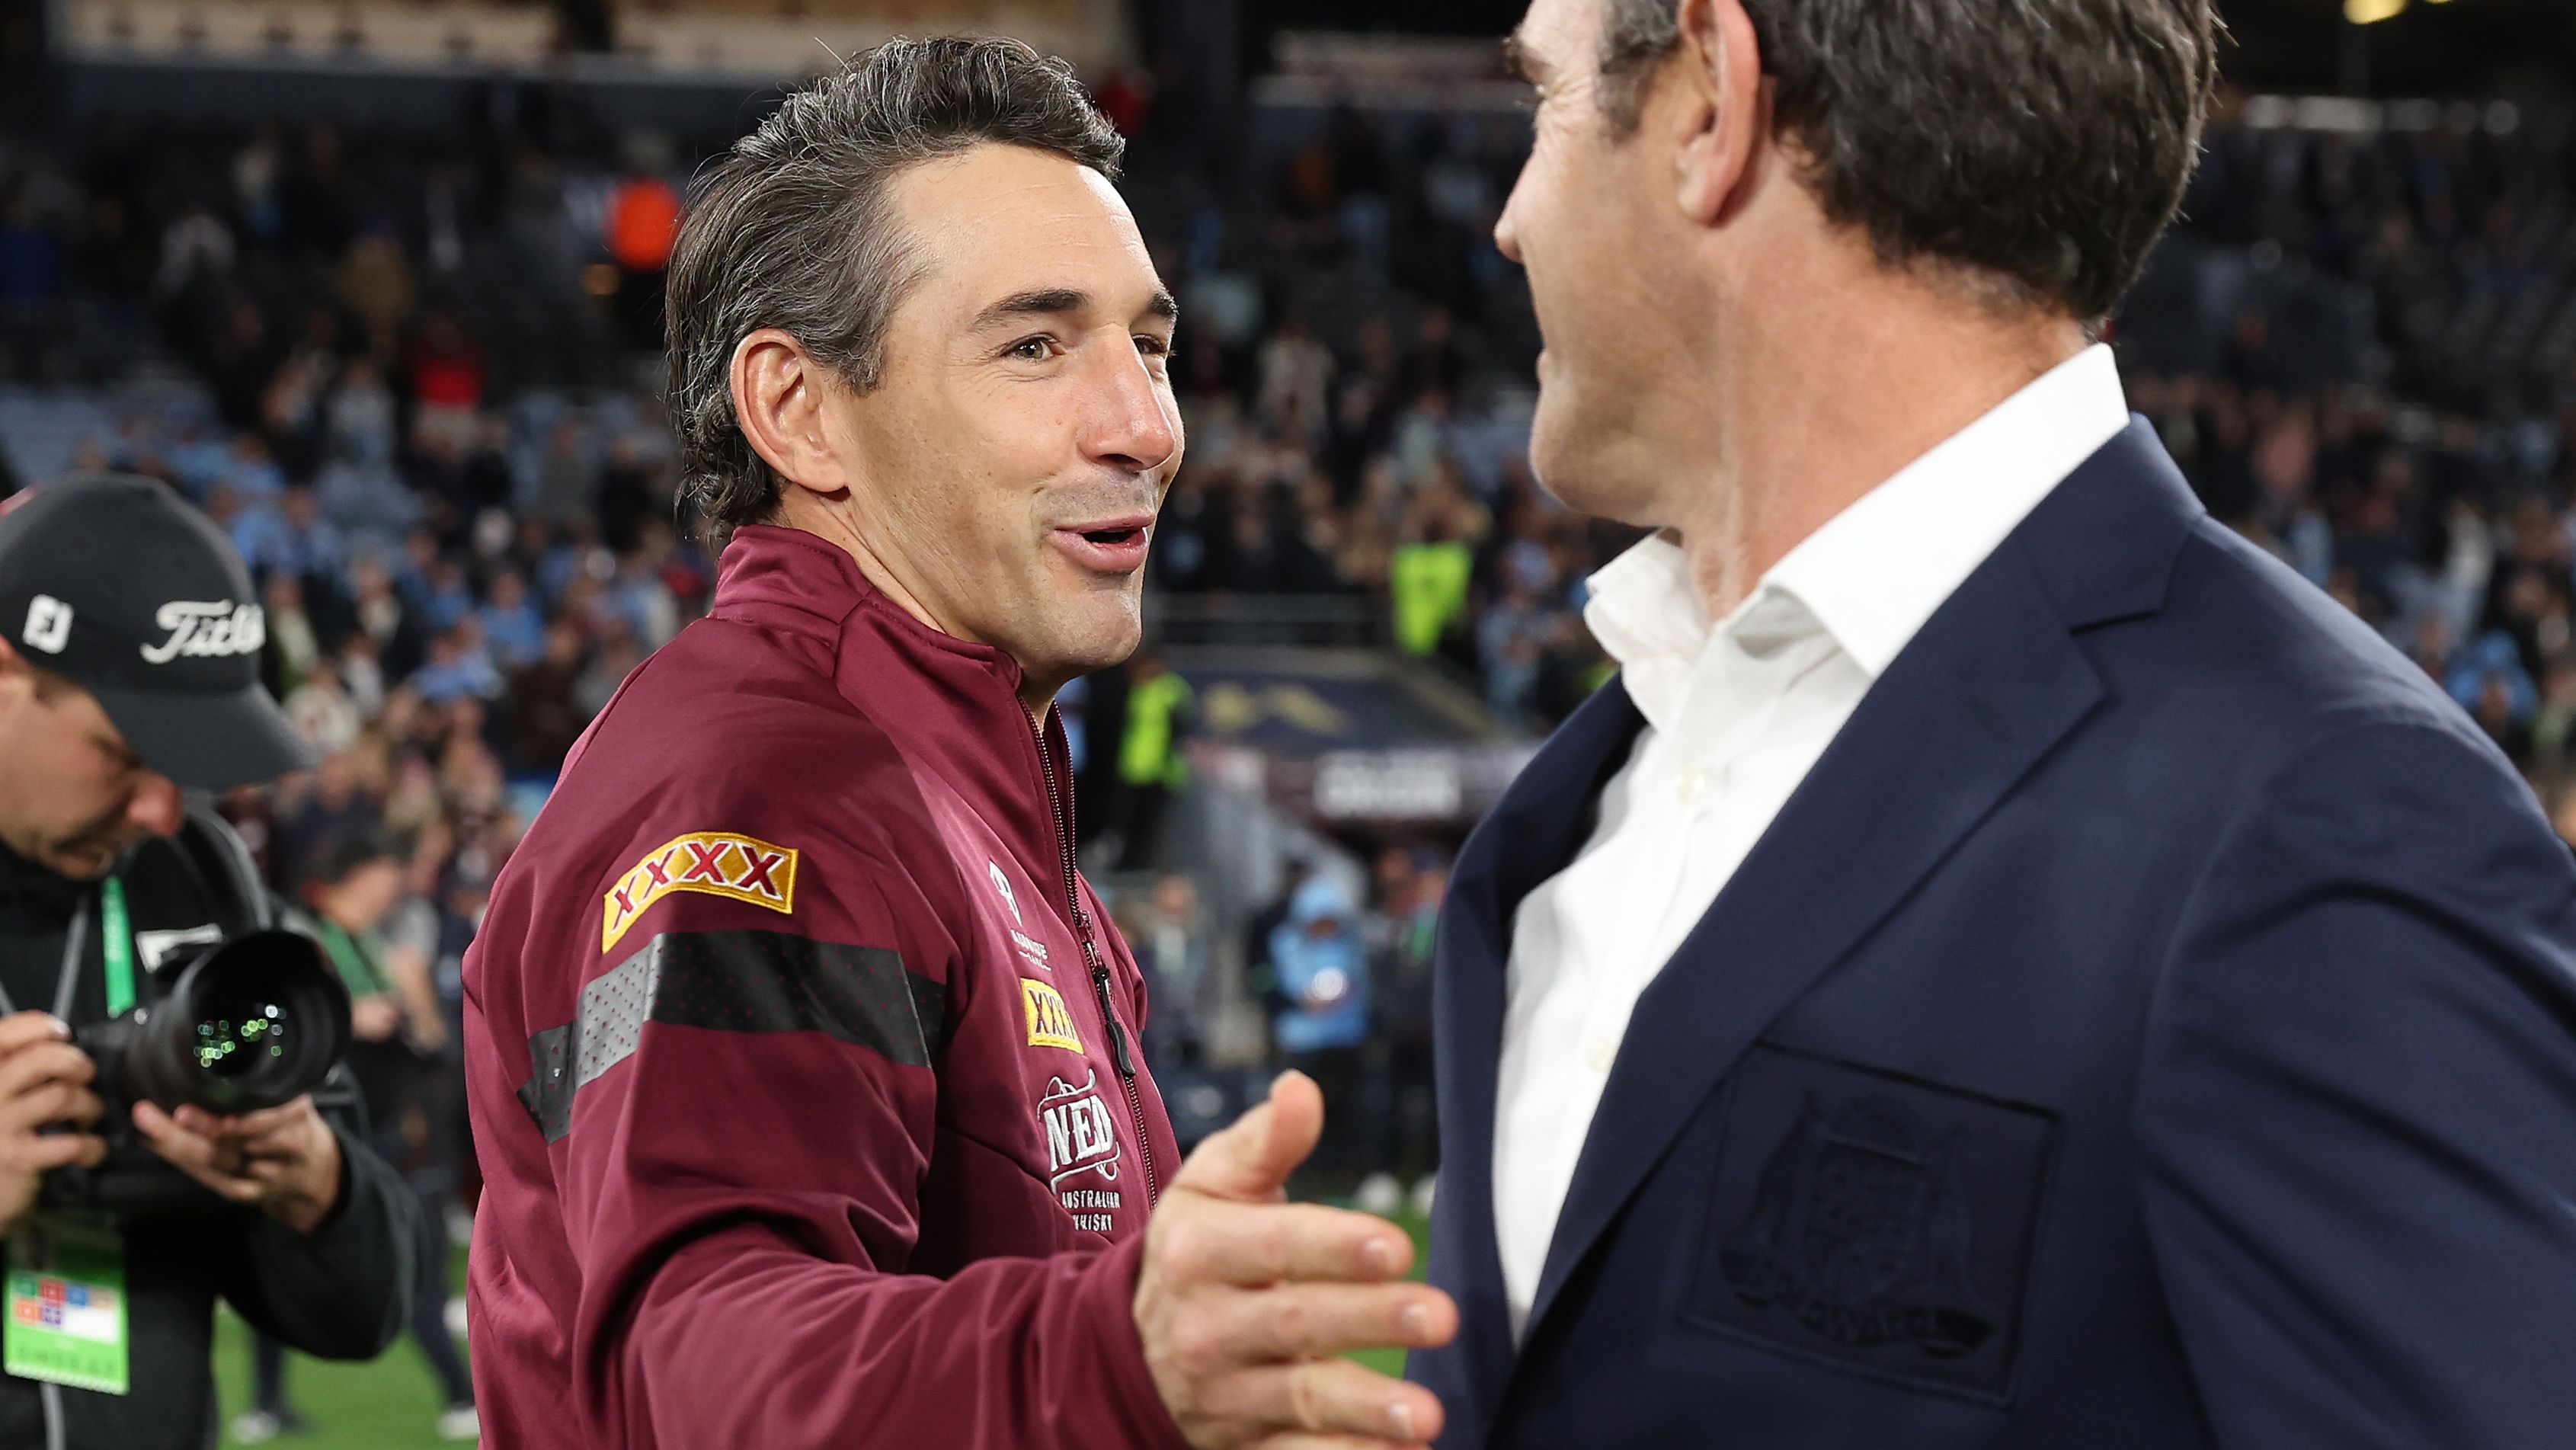 Maroons coach Billy Slater and Blues coach Brad Fittler embrace after game three of the State of Origin series.